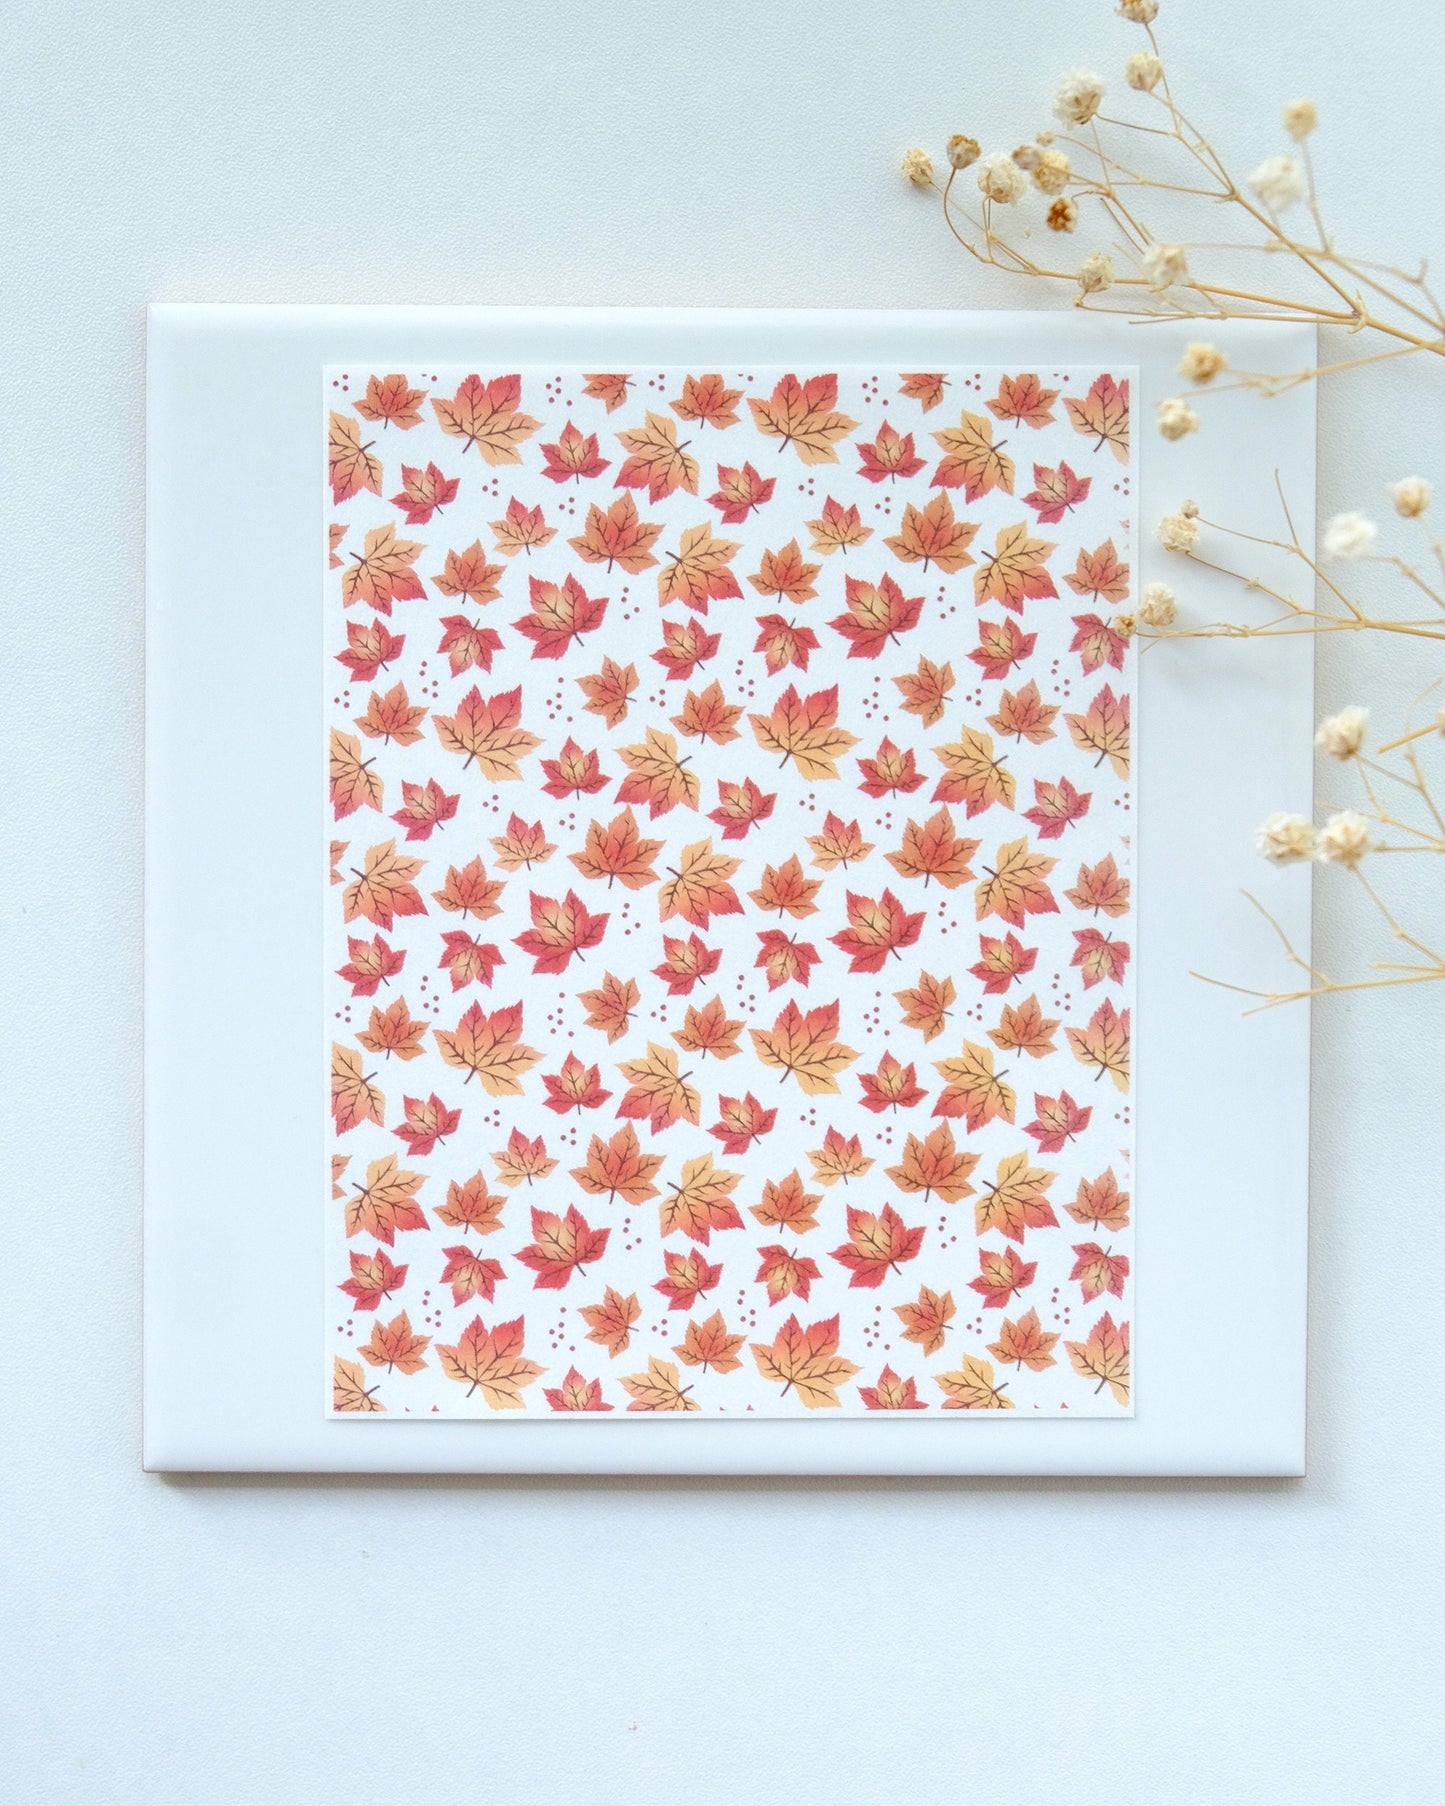 Fall Maple Lea Image Transfer Paper for Polymer Clay